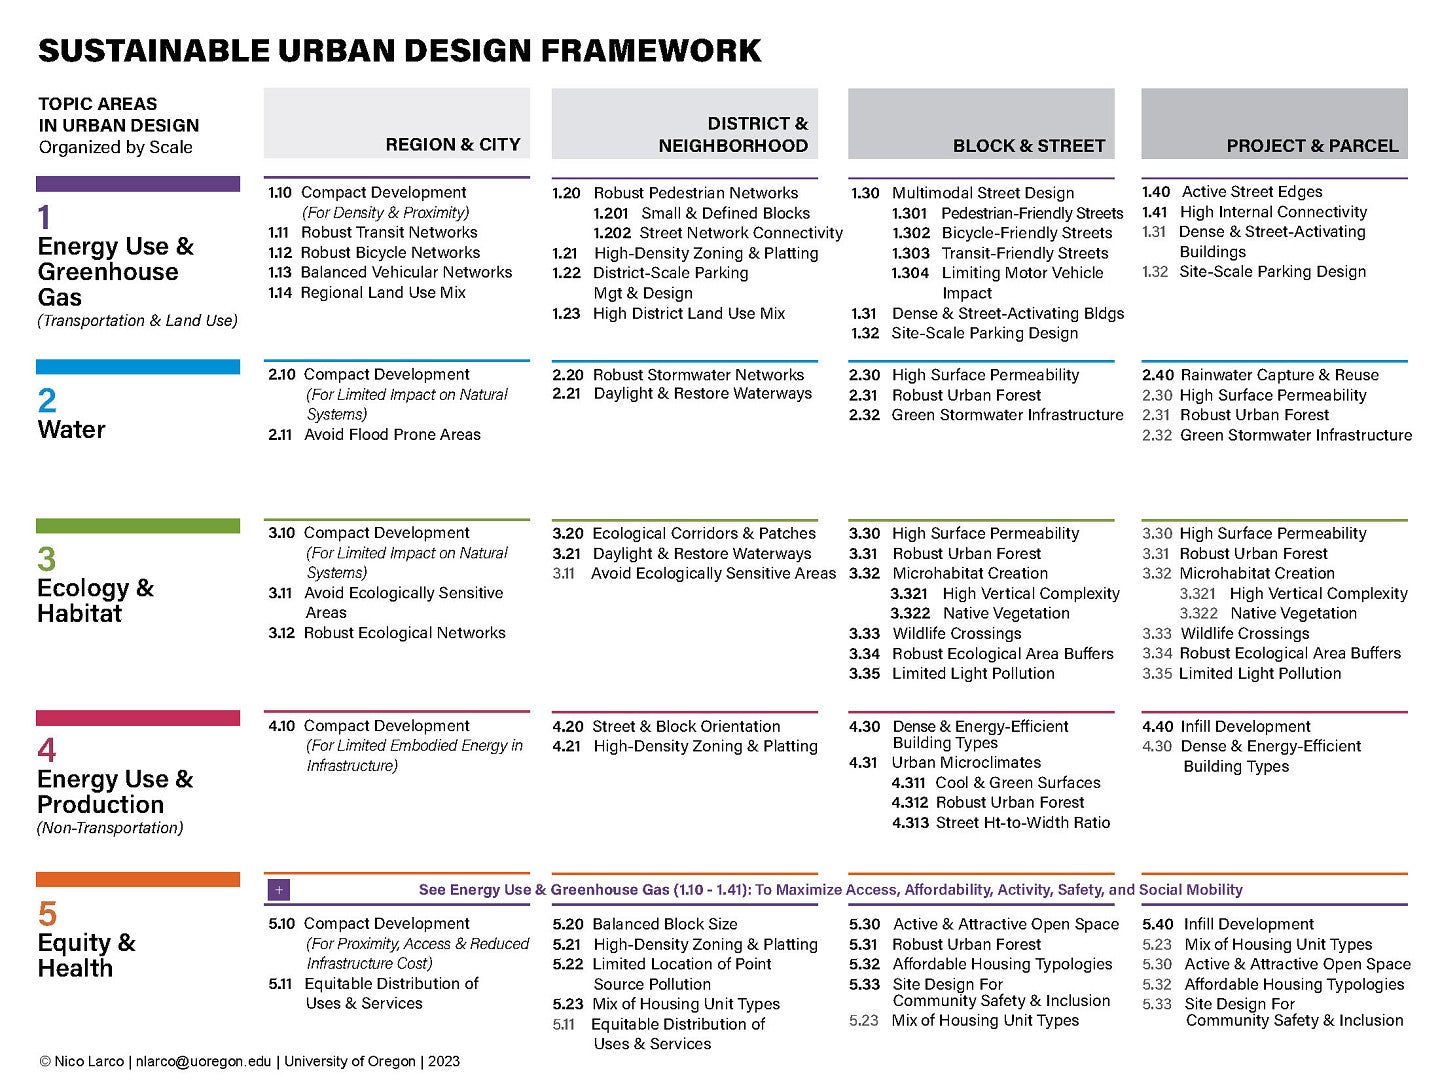 Image of the Sustainable Urban Design Framework matrix. Shows the five main topics in the book and a comprehensive list of activities/projects that correlate to the main topic. 